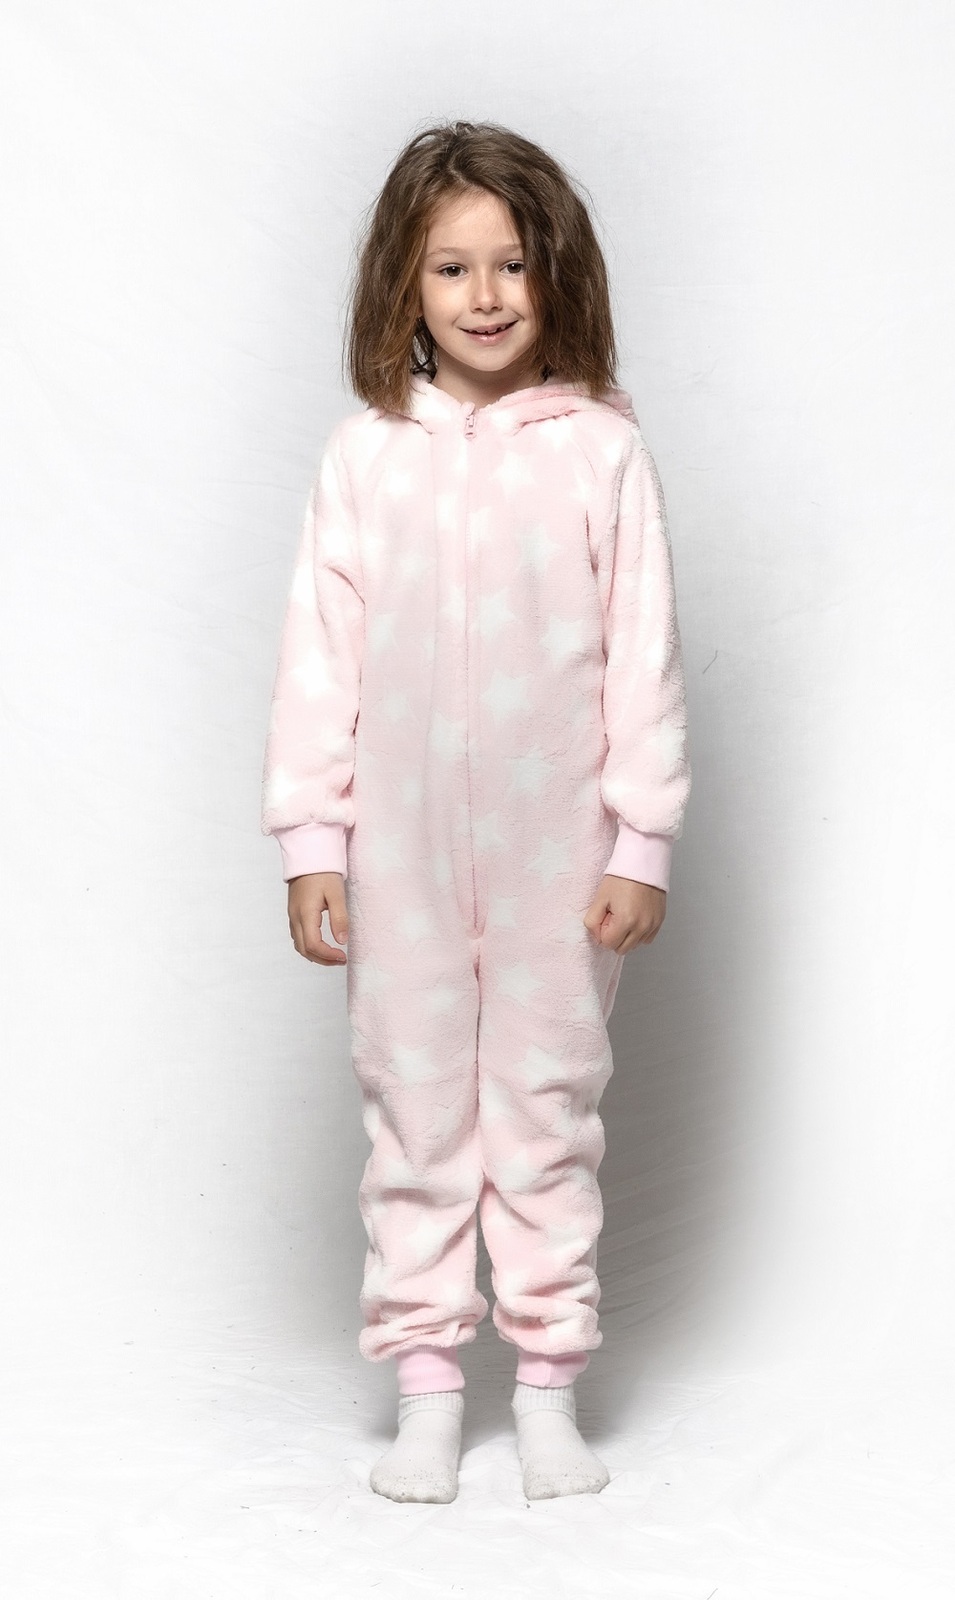 Link Syge person Fritagelse Girls Size 3-8 Pink Star Bear Winter Fleece Hooded One Piece Jumpsuit